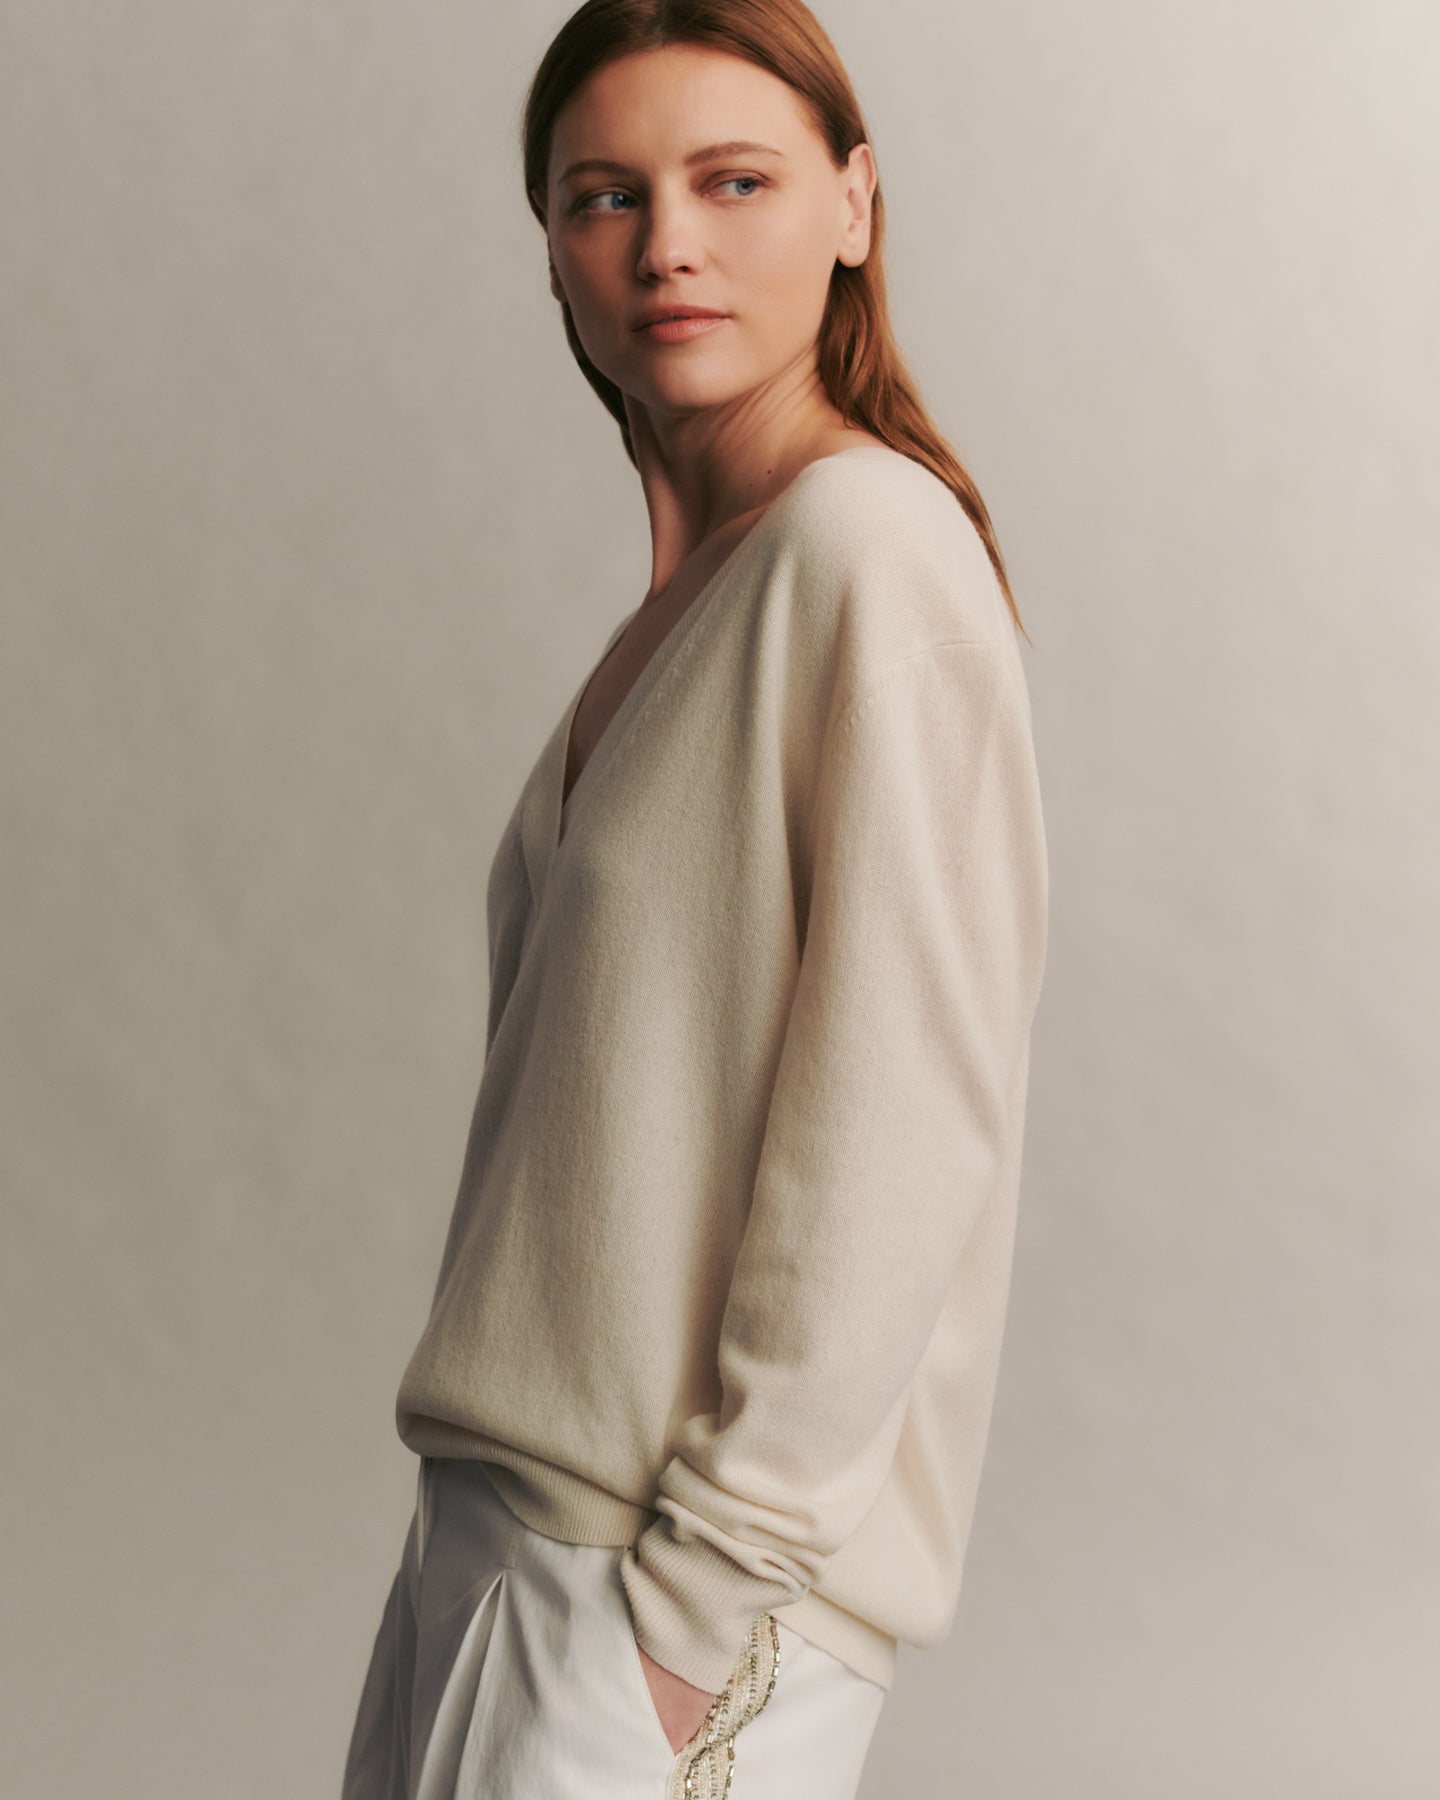 TWP Ivory Deep V Sweater in Cashmere view 4